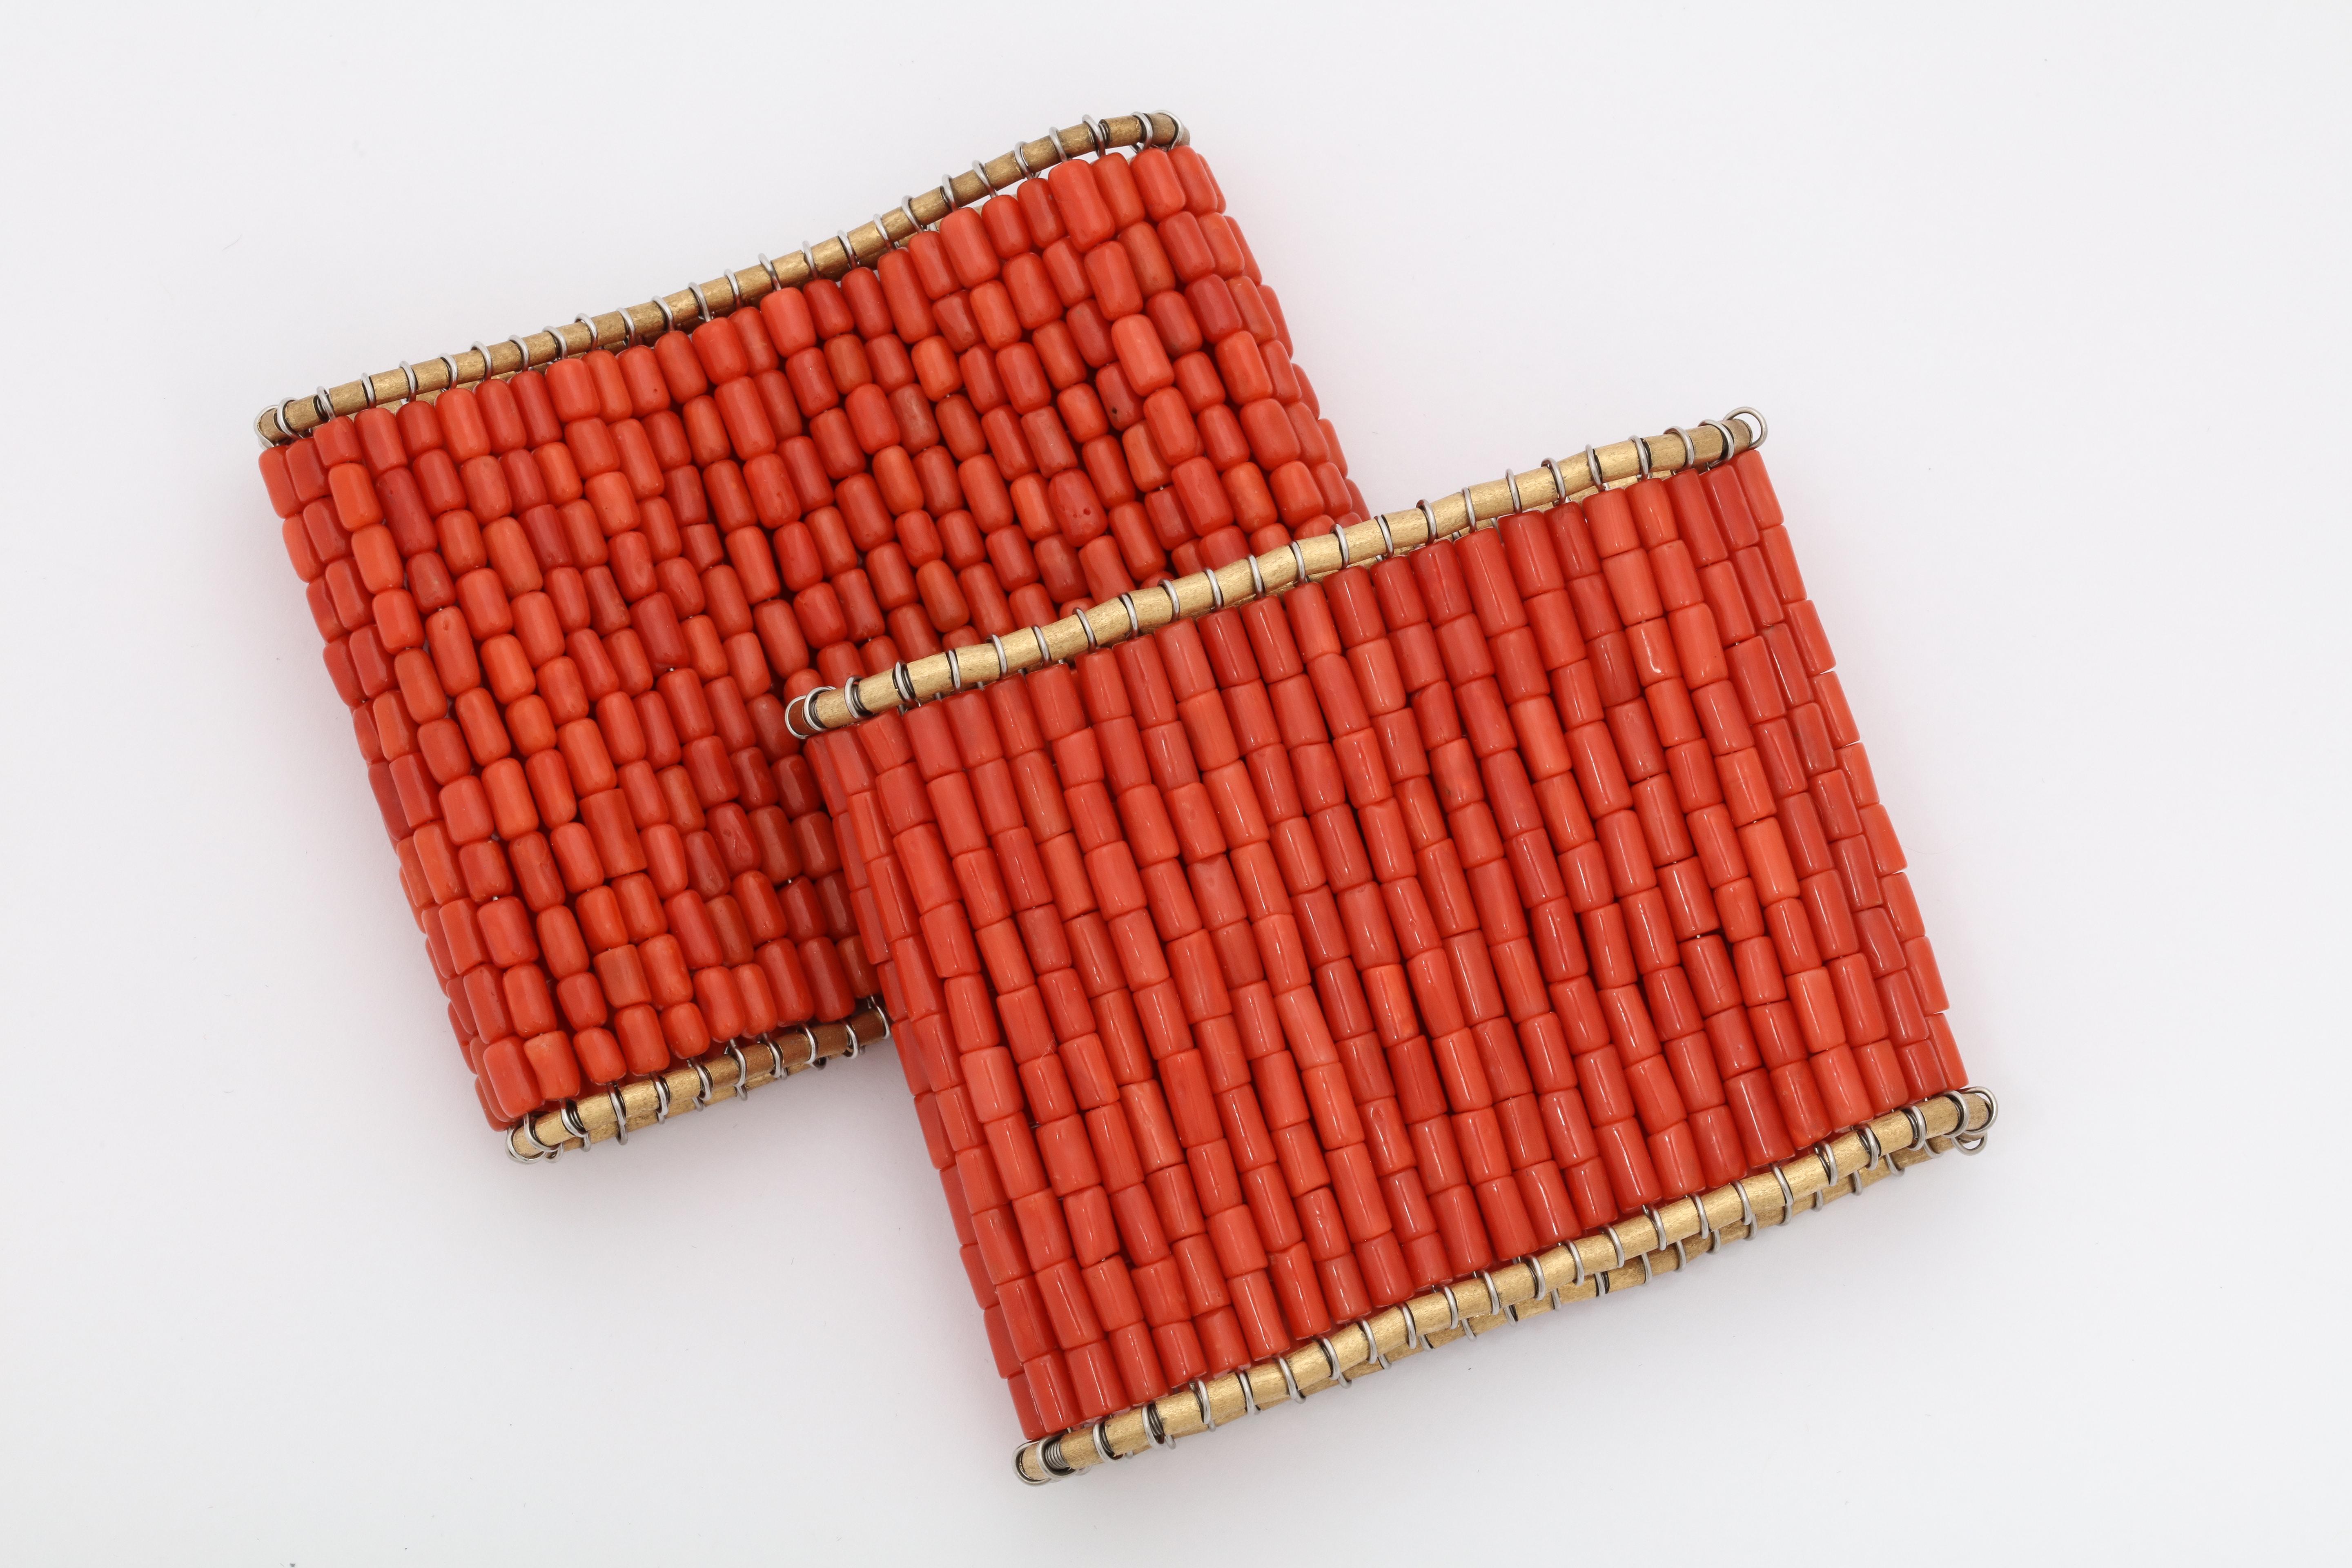 One  Ladies 18kt Gold One Size Fits All Slip On Cuff Bracelets Designed With Numerous Coral Rectangular Beads. Beautifully And Flexibly Made In A Giant Jumbo Dramatic Width. Circa 1970's.NOTE: May Be Sold Separetely.One Is Left For Sale  One Had